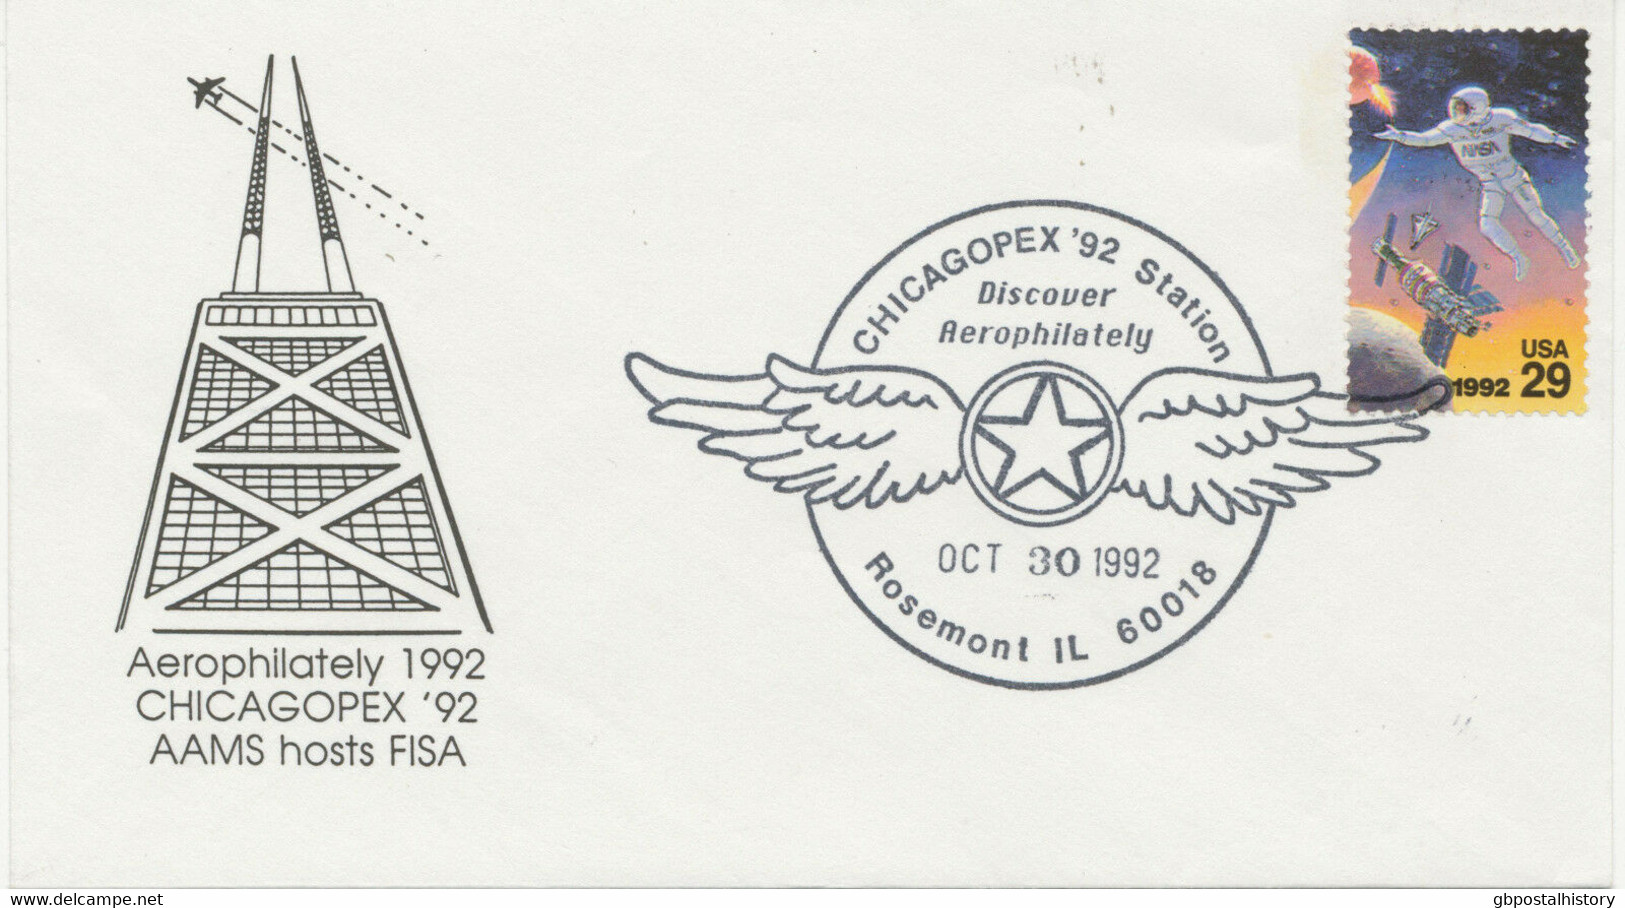 USA 1992 CHICAGOPEX `92 Station / Discover Aerophilately / OCT 30 1992 / Rosemon - 3c. 1961-... Covers